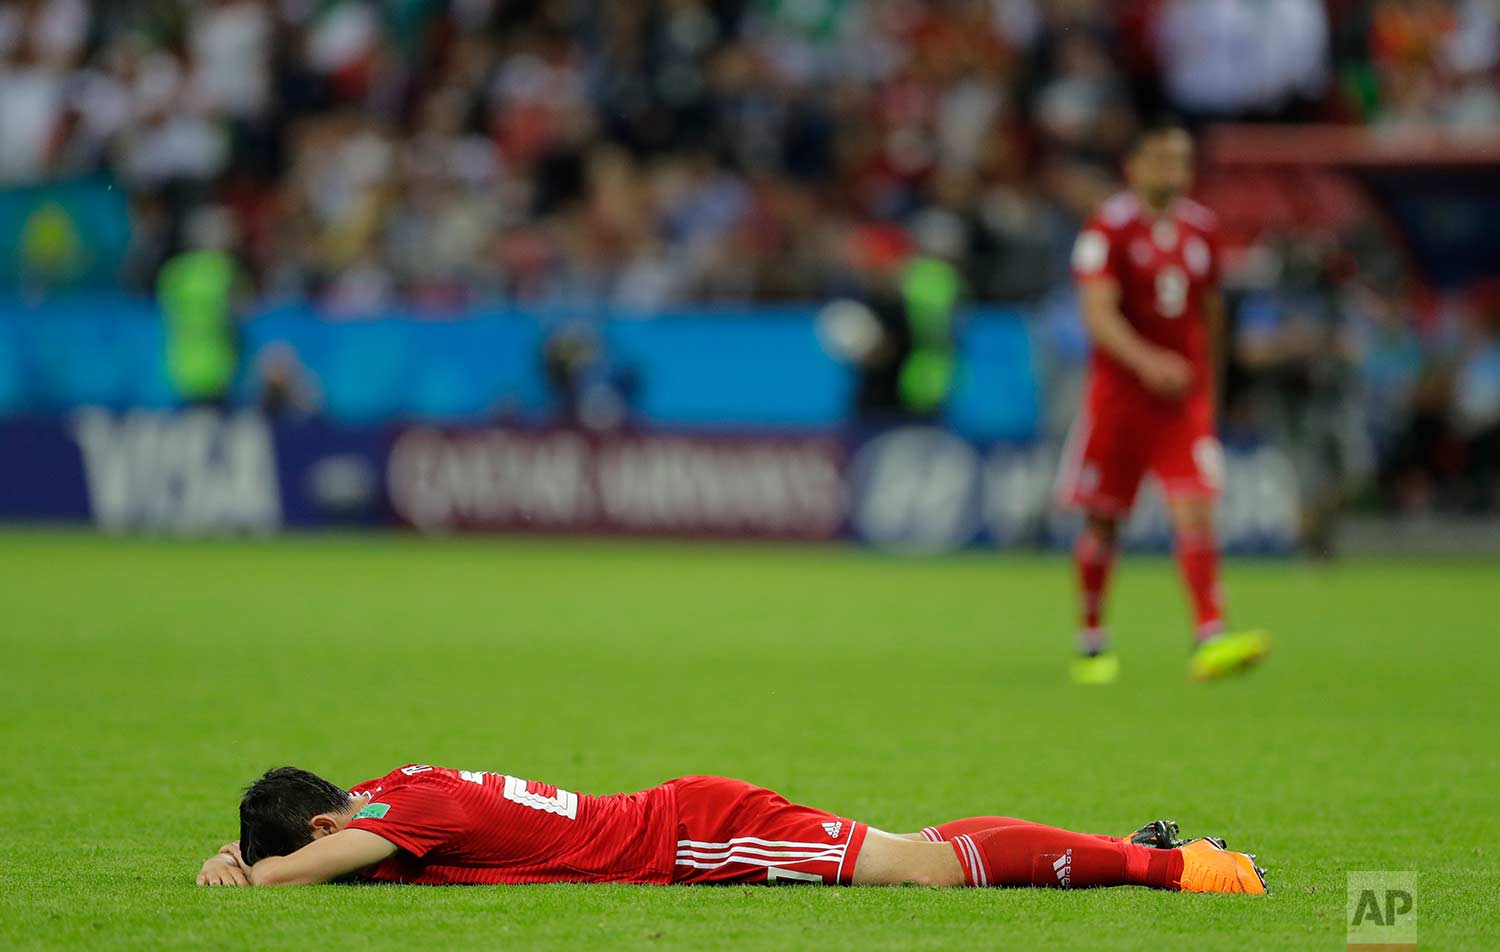  Iran's Sardar Azmoun lies flat out on the ground after the end of the group B match between Iran and Spain at the 2018 soccer World Cup in the Kazan Arena in Kazan, Russia, Wednesday, June 20, 2018. Spain won the game 1-0. (AP Photo/Sergei Grits) 